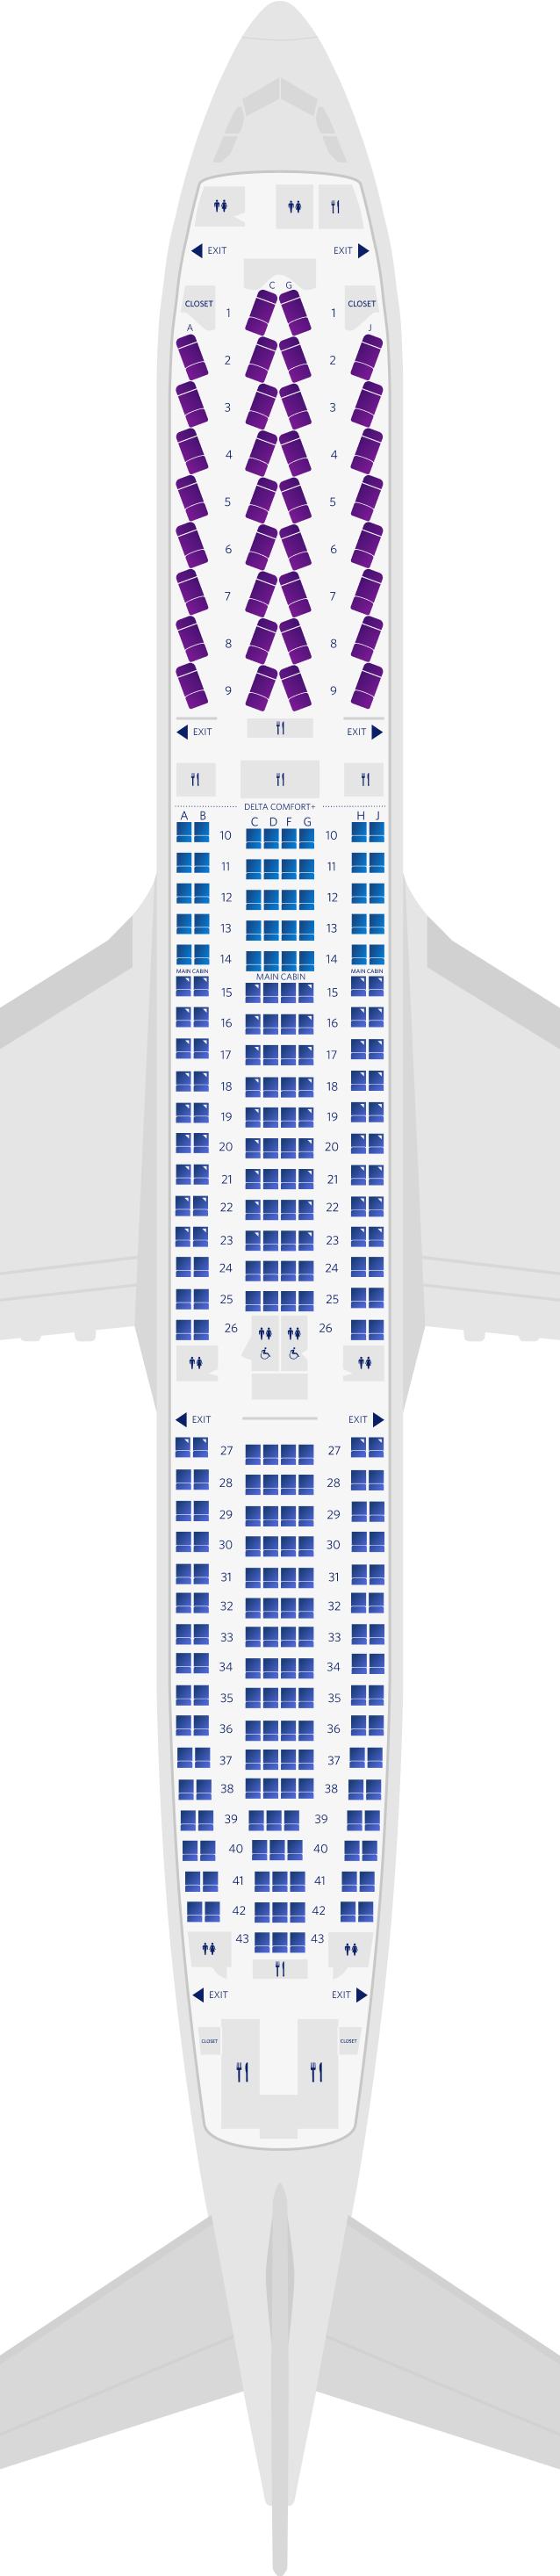 Delta Air Lines Airbus A330-300 Seat Map